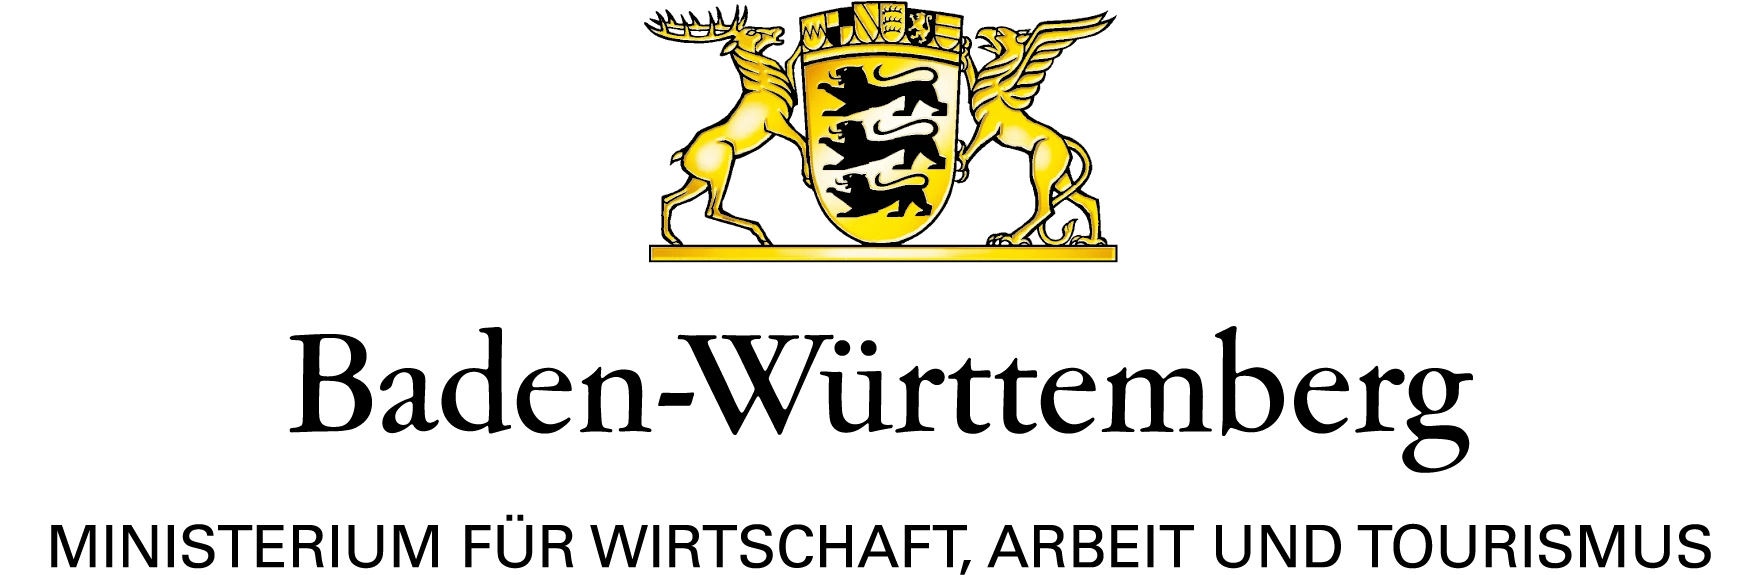 Logo of Baden-Württemberg ministry for economy, labor and tourism 